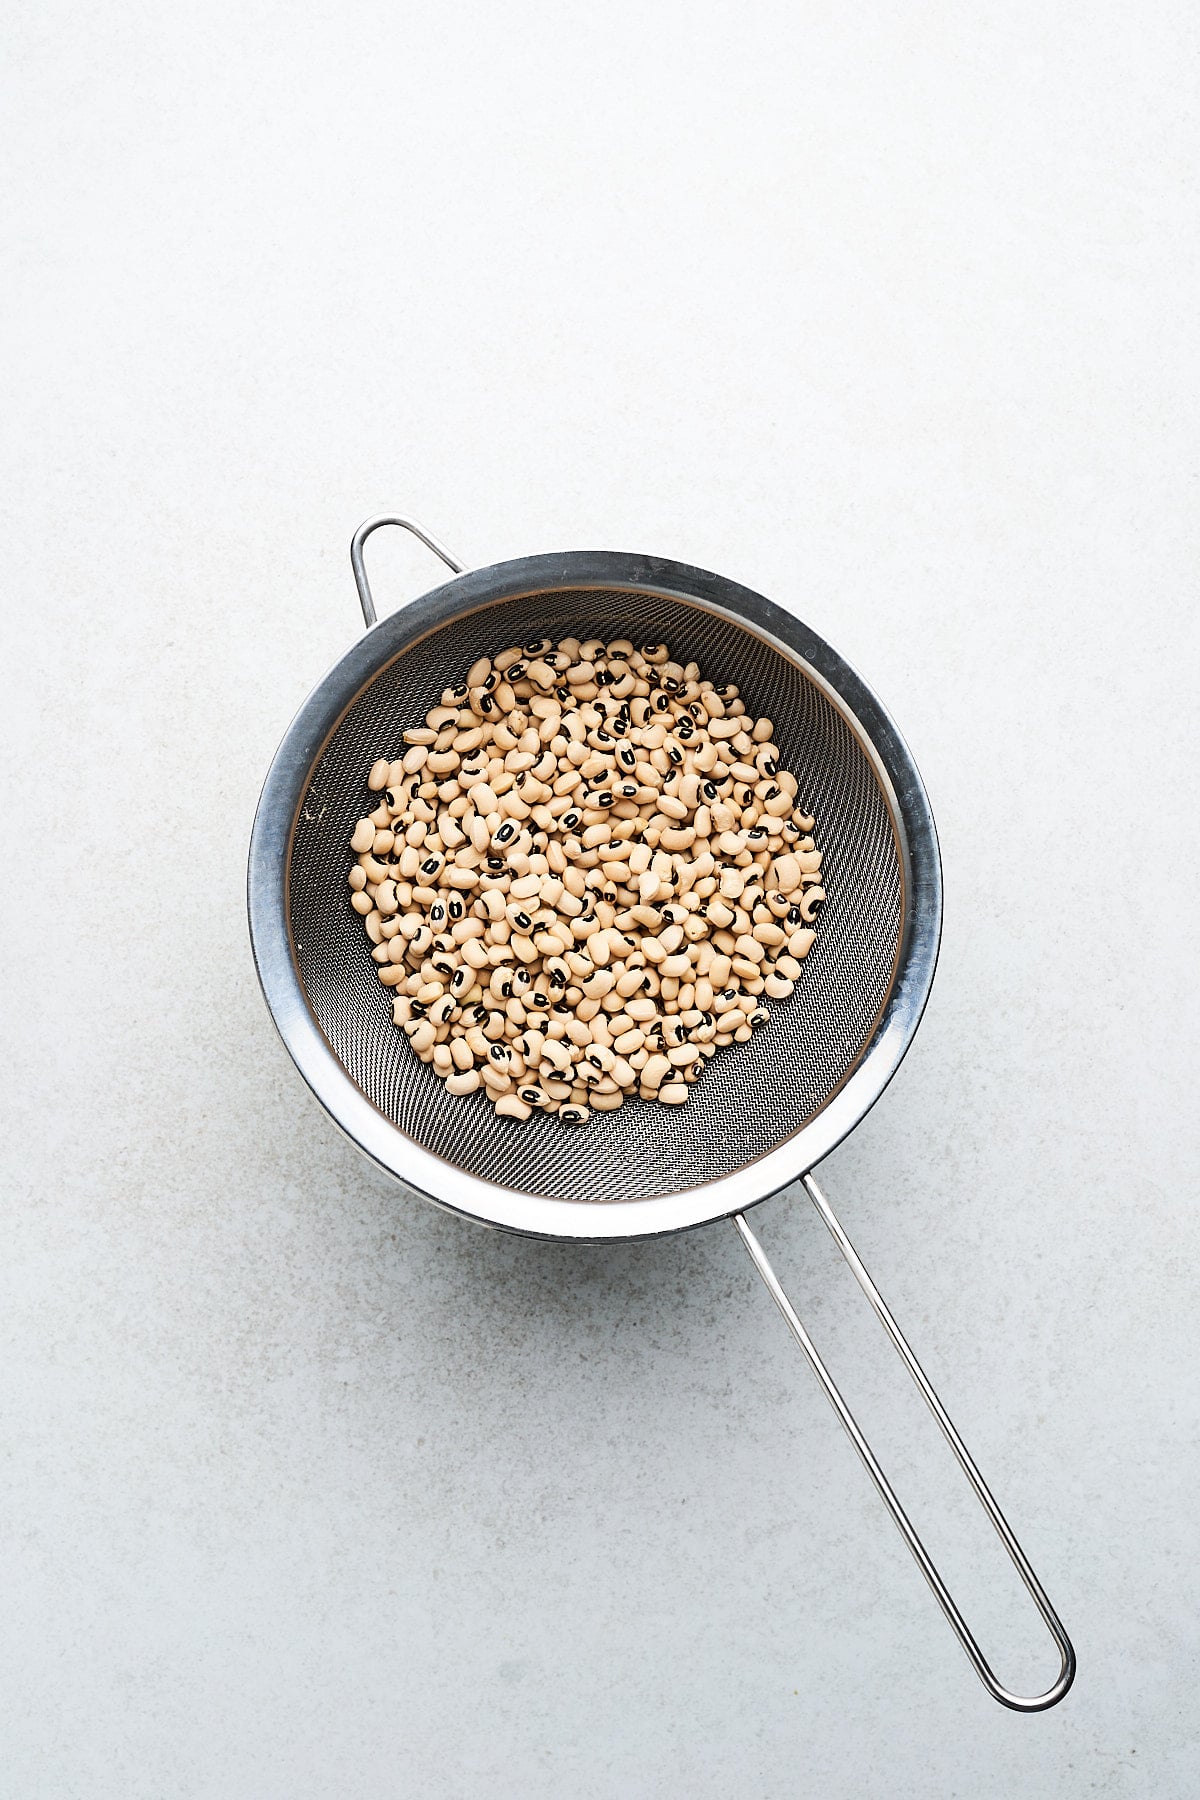 Black eyed peas in a strainer.